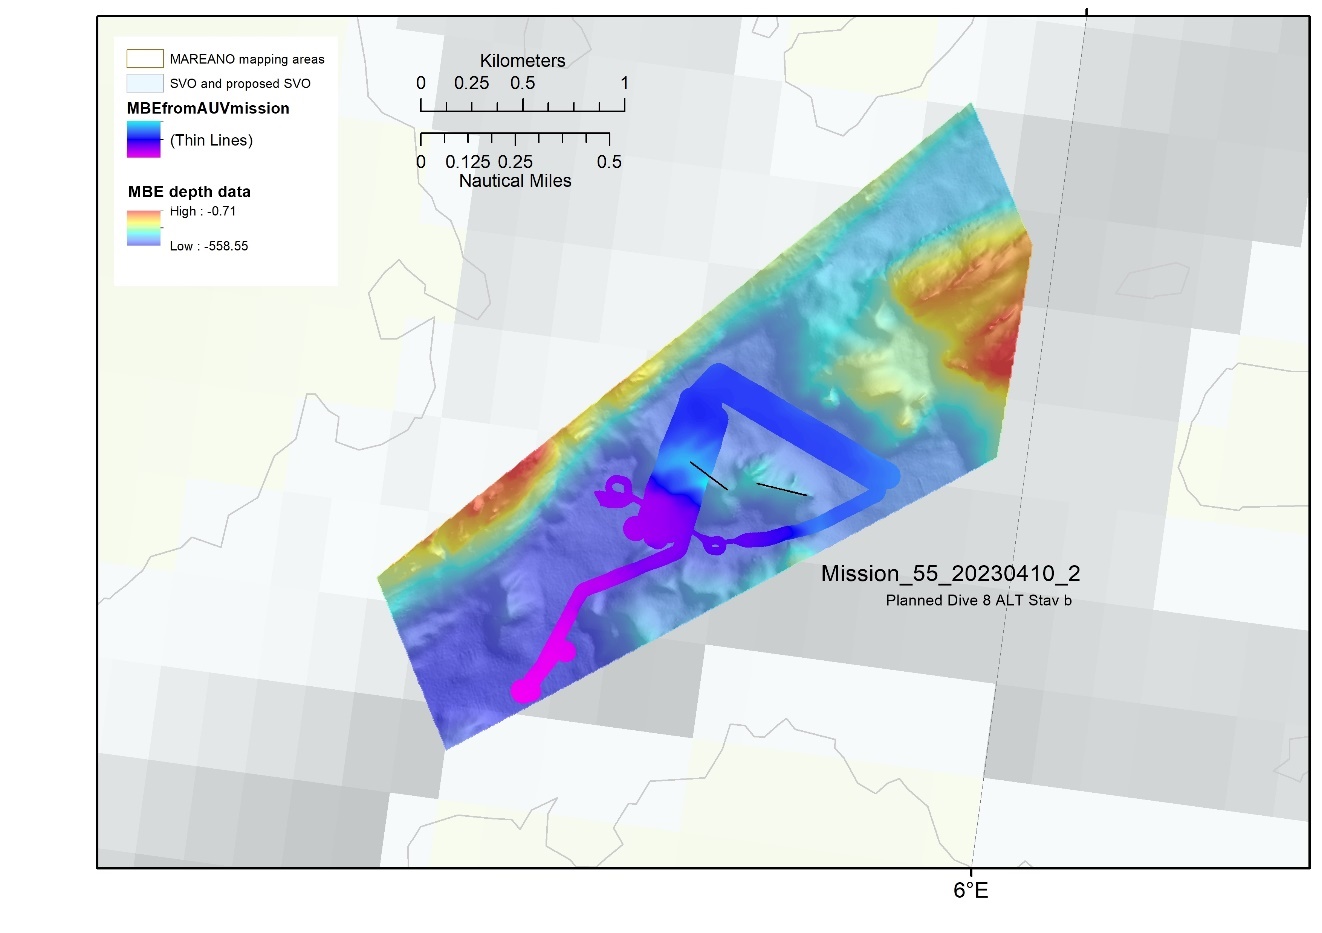 Image shows a map of the Fognafjorden area with the AUV mision indicated by both its MBE data footprint and a label. The MBE data shows a complex shape that ranges around some underwater hill features that were too steep to cover fully.